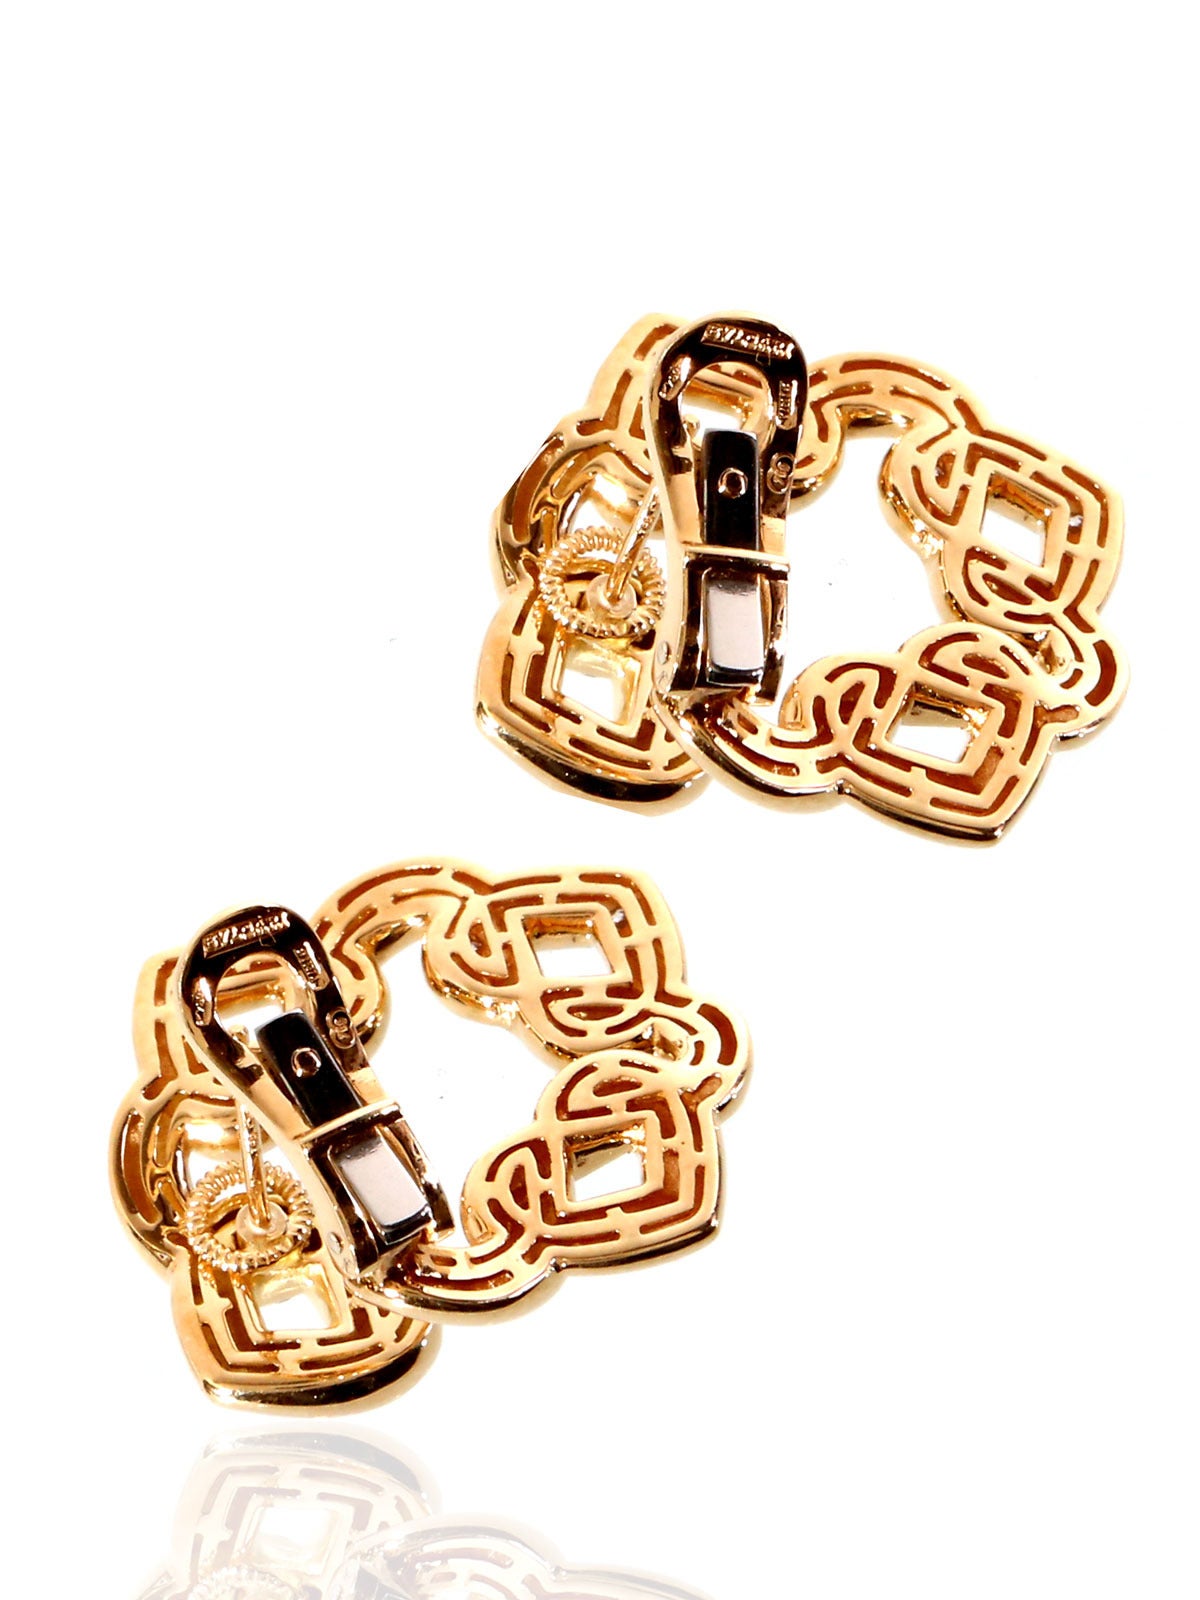 A fabulous pair of authentic Bulgari yellow gold earrings adorned with 24 of finest Vs quality round brilliant cut diamonds. Classy and versatile enough to dress up virtually any ensemble.

Dimensions: 28mm Wide (1.10″ Inches)

Inventory ID: